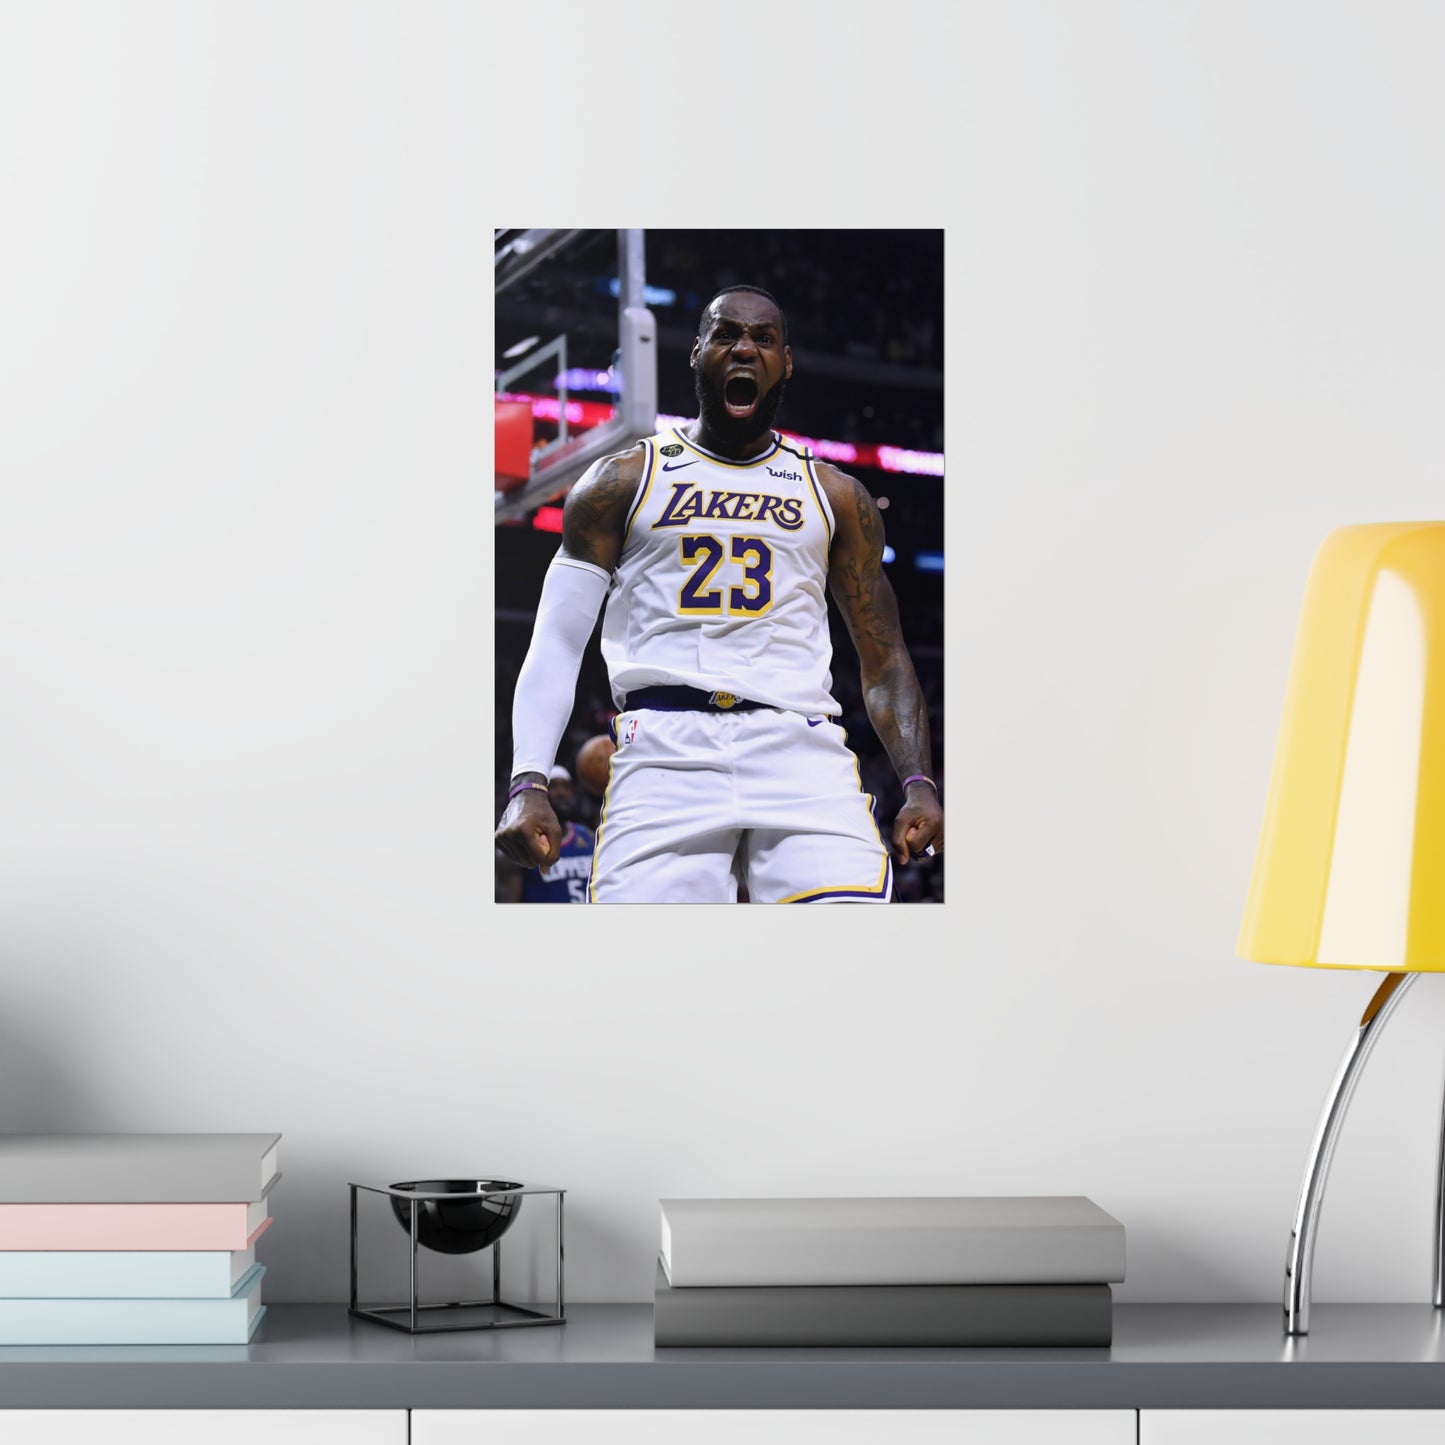 Lebron James Yelling In Celebration In White Los Angeles Lakers 23 Jersey Poster